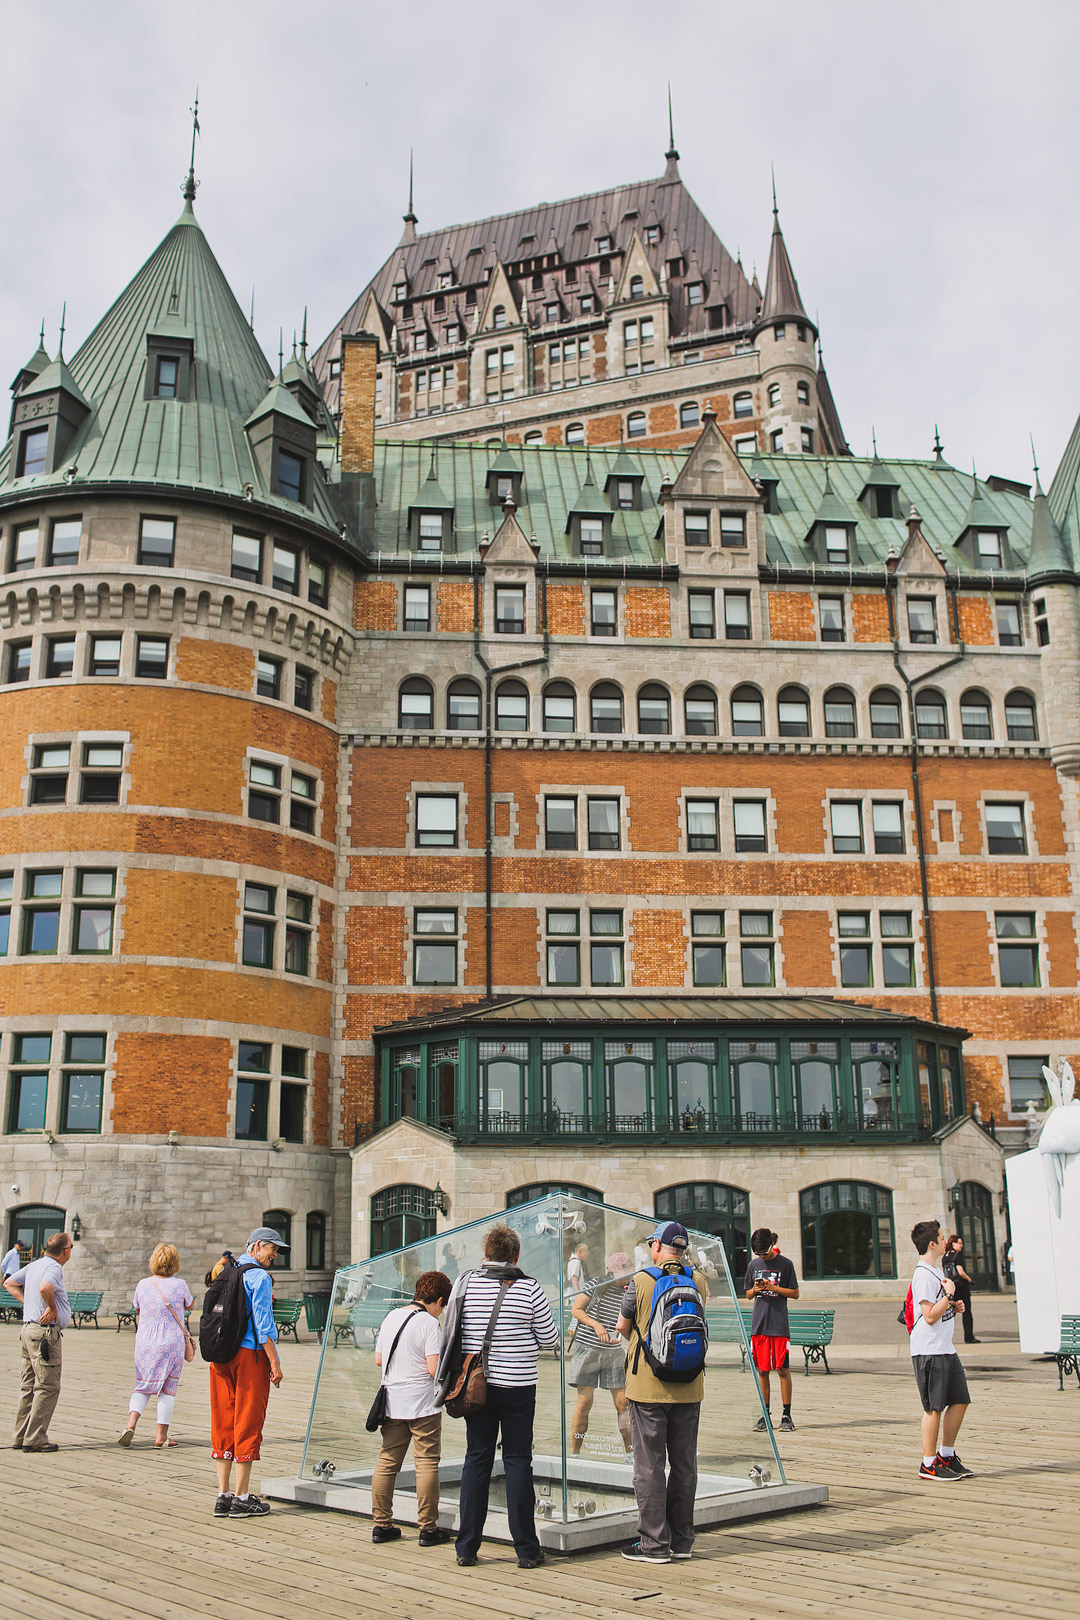 Traveling to Quebec City soon? Check out this blog post and repin for later so you don’t miss the best things to do in quebec city. It includes the best places to visit in quebec city, the best restaurants in quebec city, the best place to stay in quebec city, and more. It also includes what you should do in quebec city with kids and beautiful quebec city photos. // Local Adventurer #quebec #quebeccity #canada #travel